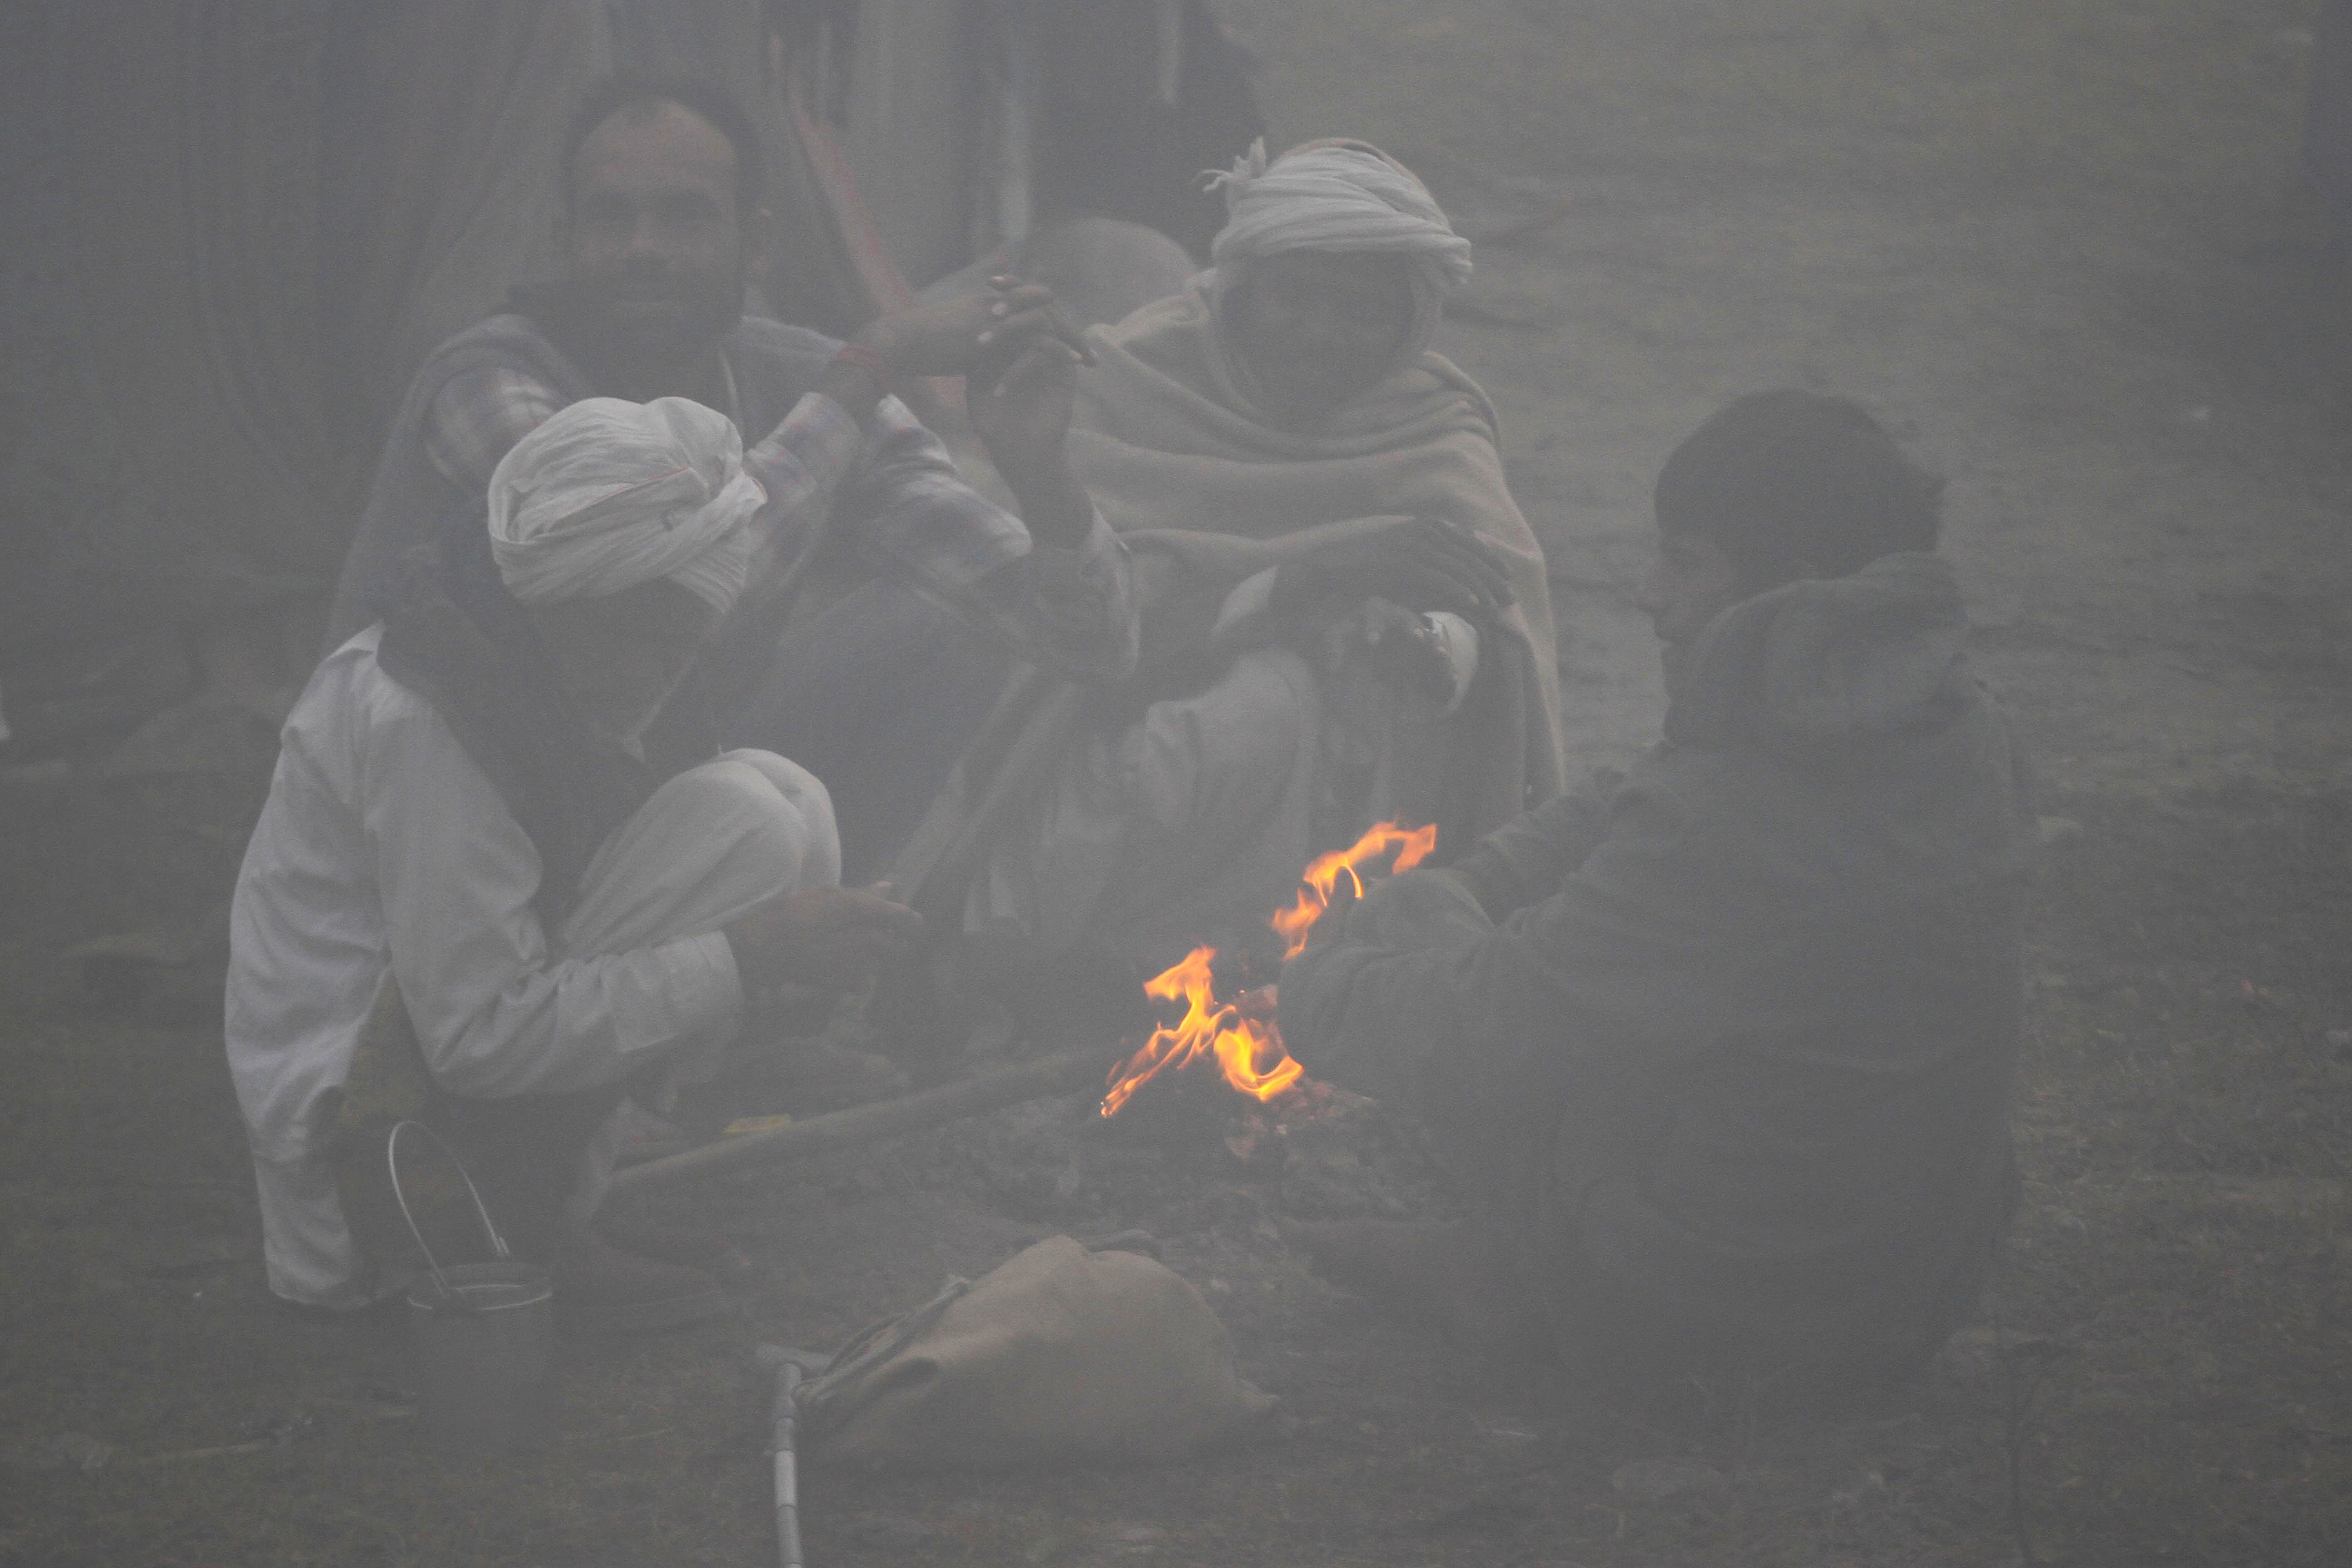 DELHI RECORDS COLDEST DAY OF THE SEASON, ONE DIES IN MP